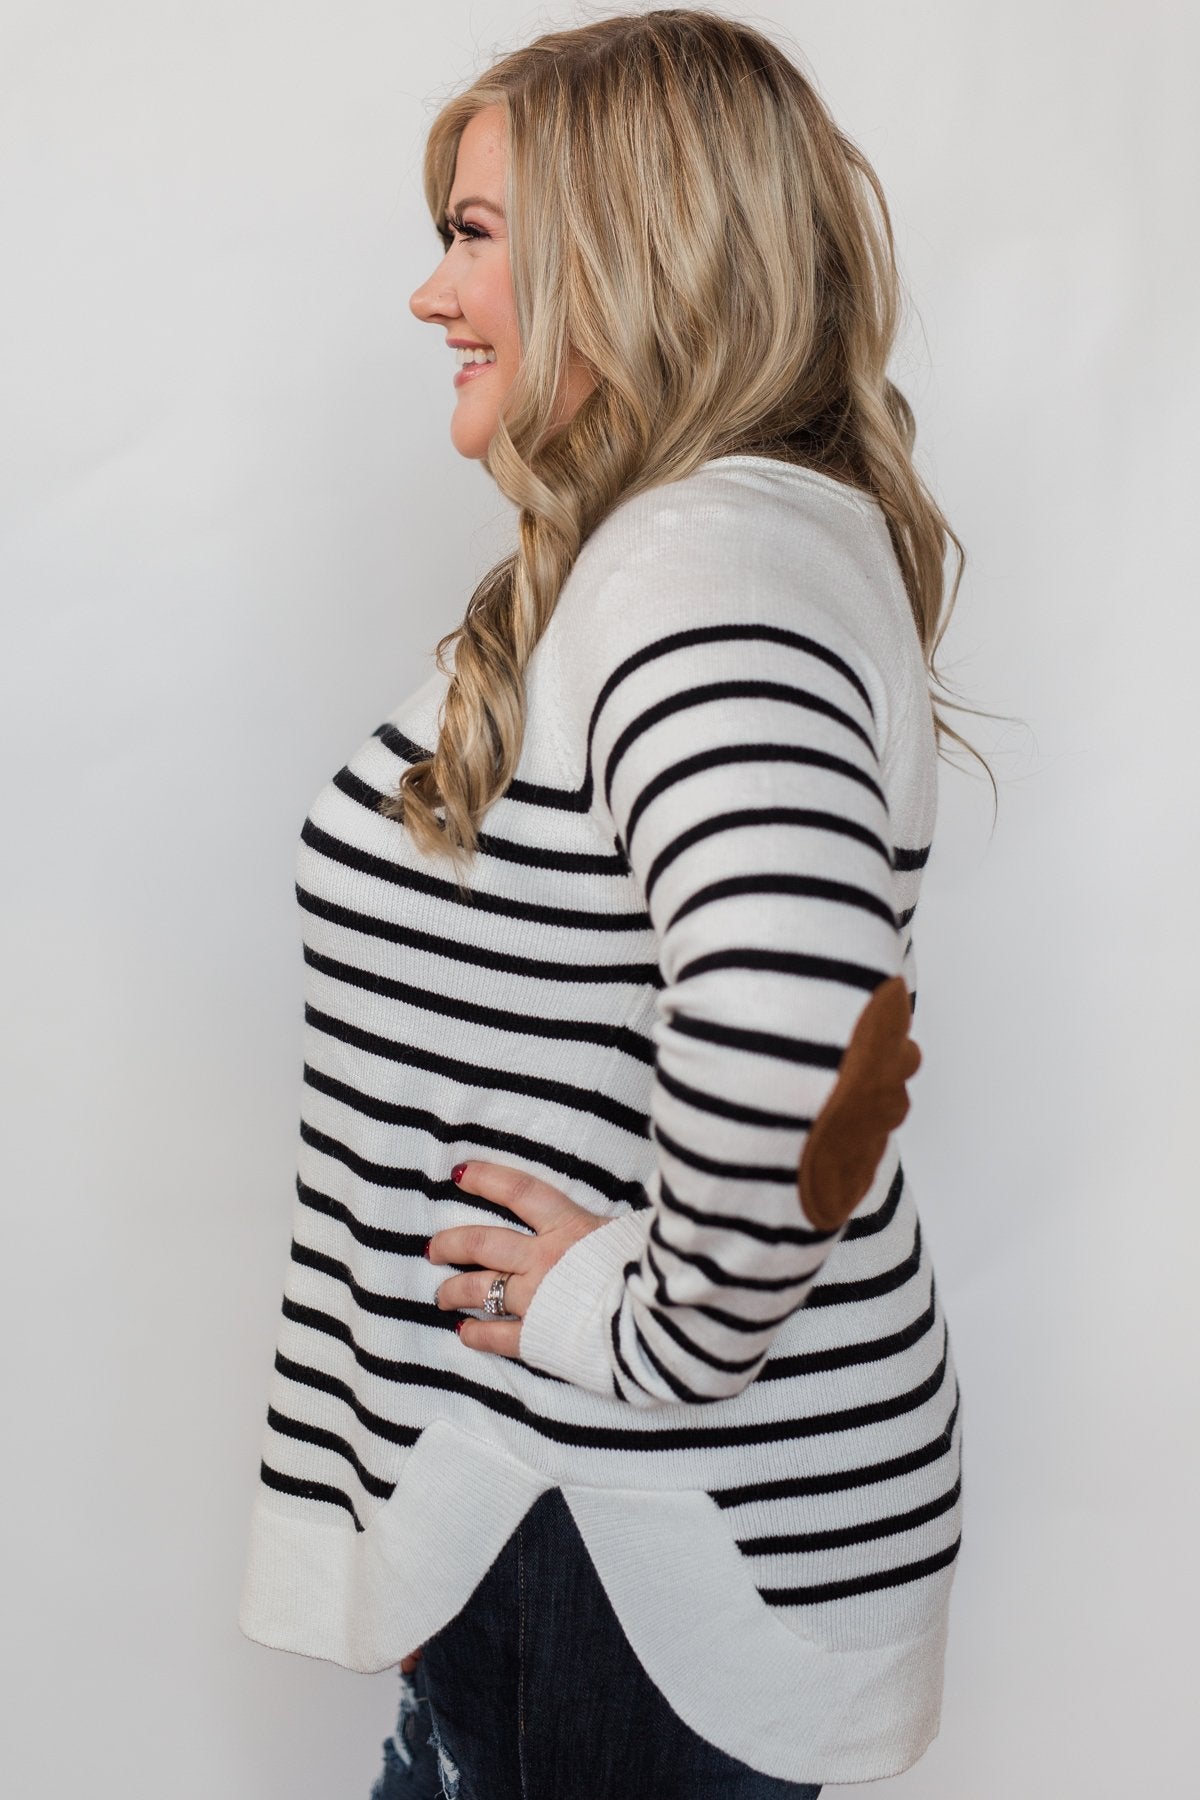 Cozy in Stripes Elbow Patch Sweater - Black & White